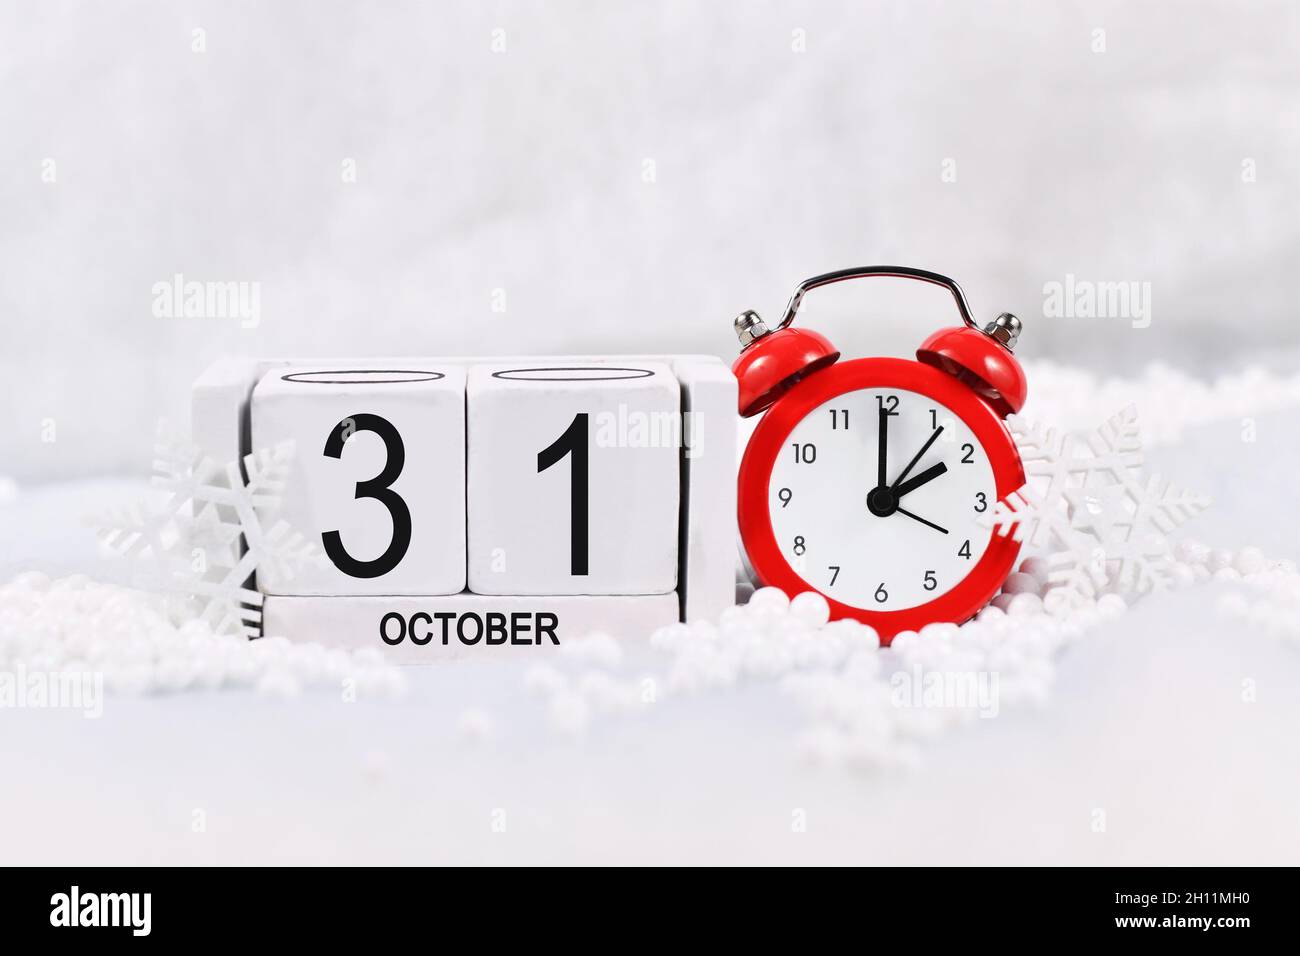 Concept for time change for daylight saving winter time in Europe on October 31st with red alarm clock and calendar in snow Stock Photo